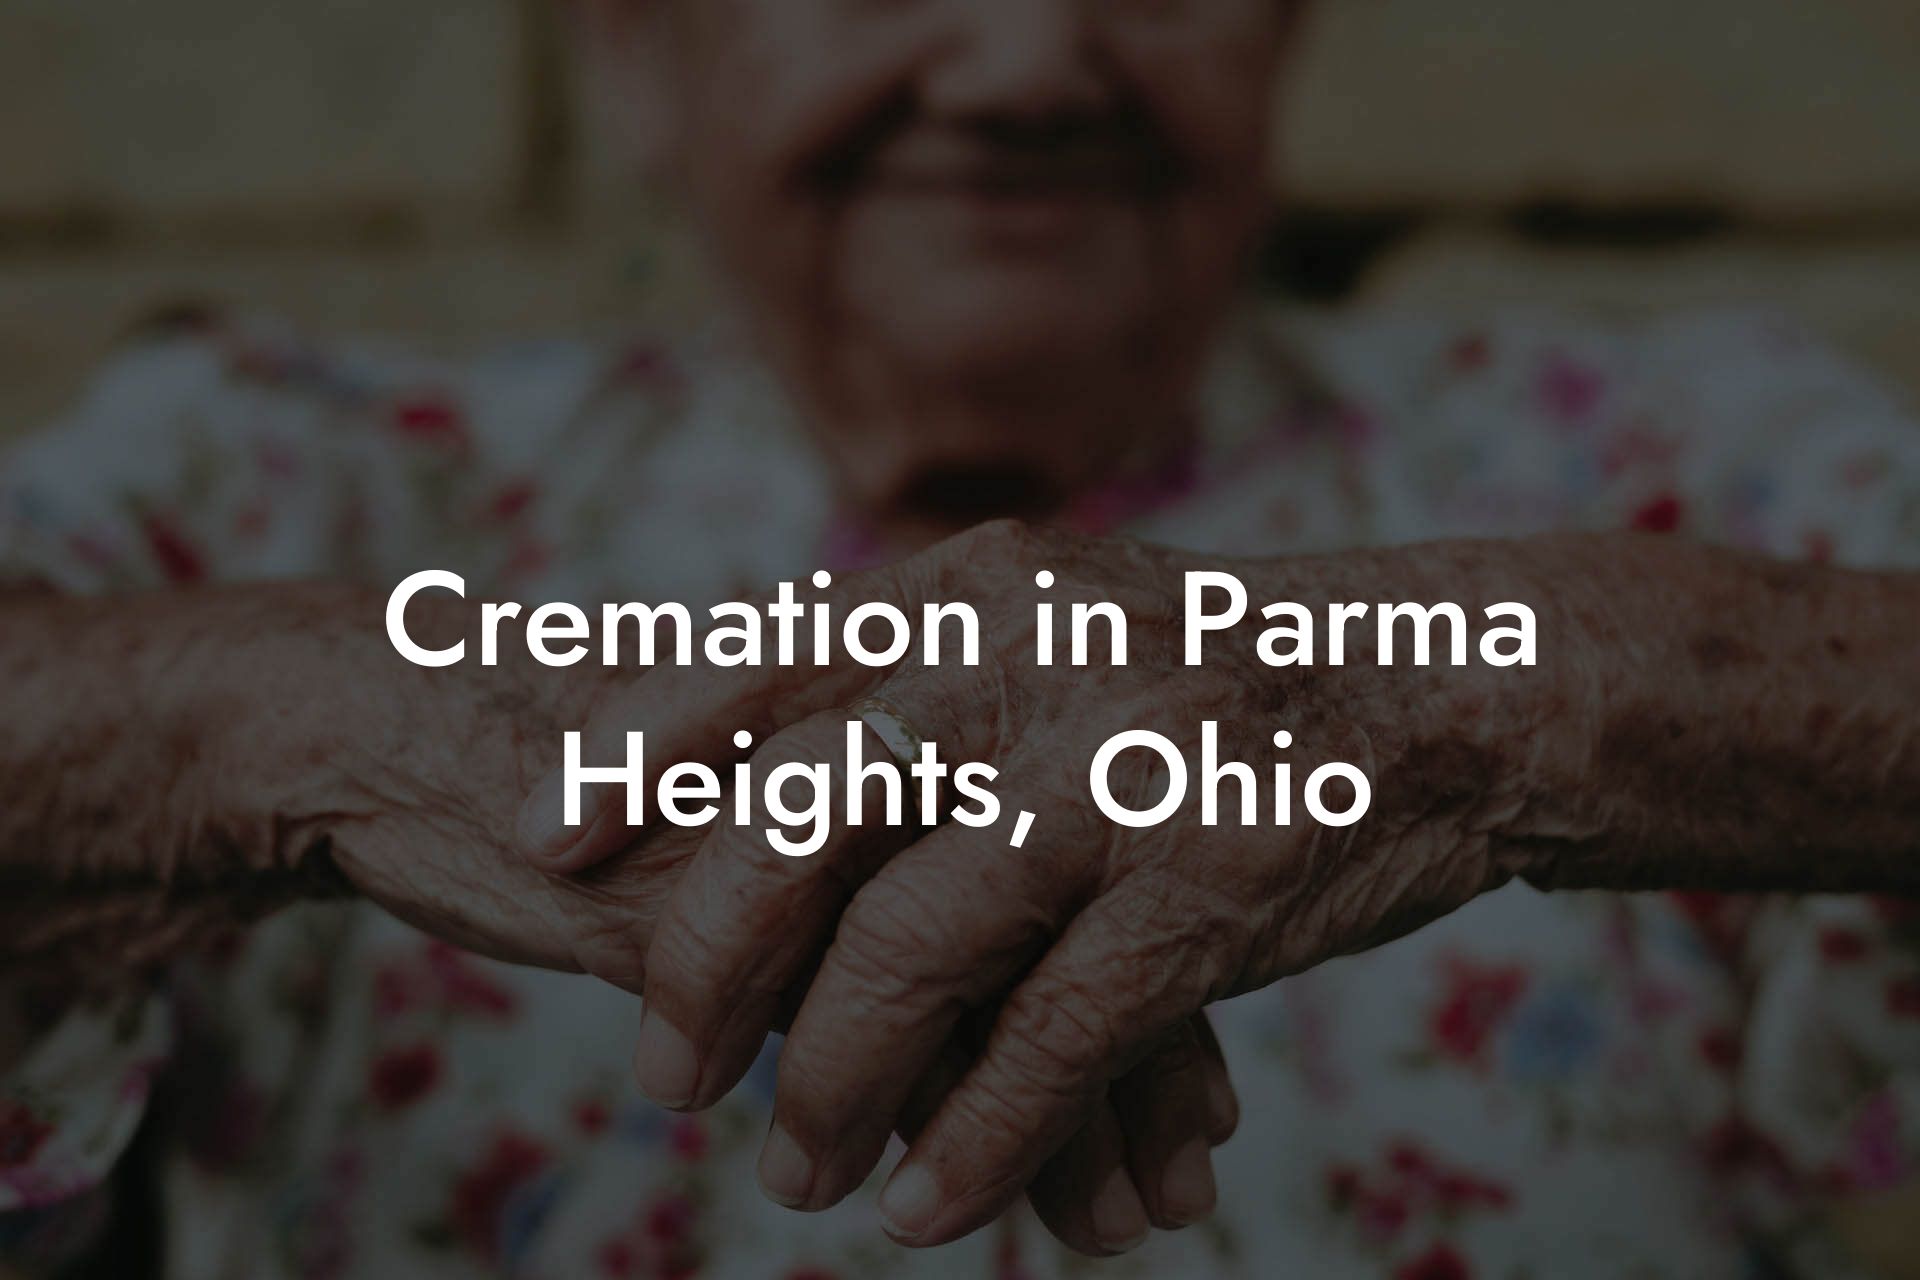 Cremation in Parma Heights, Ohio